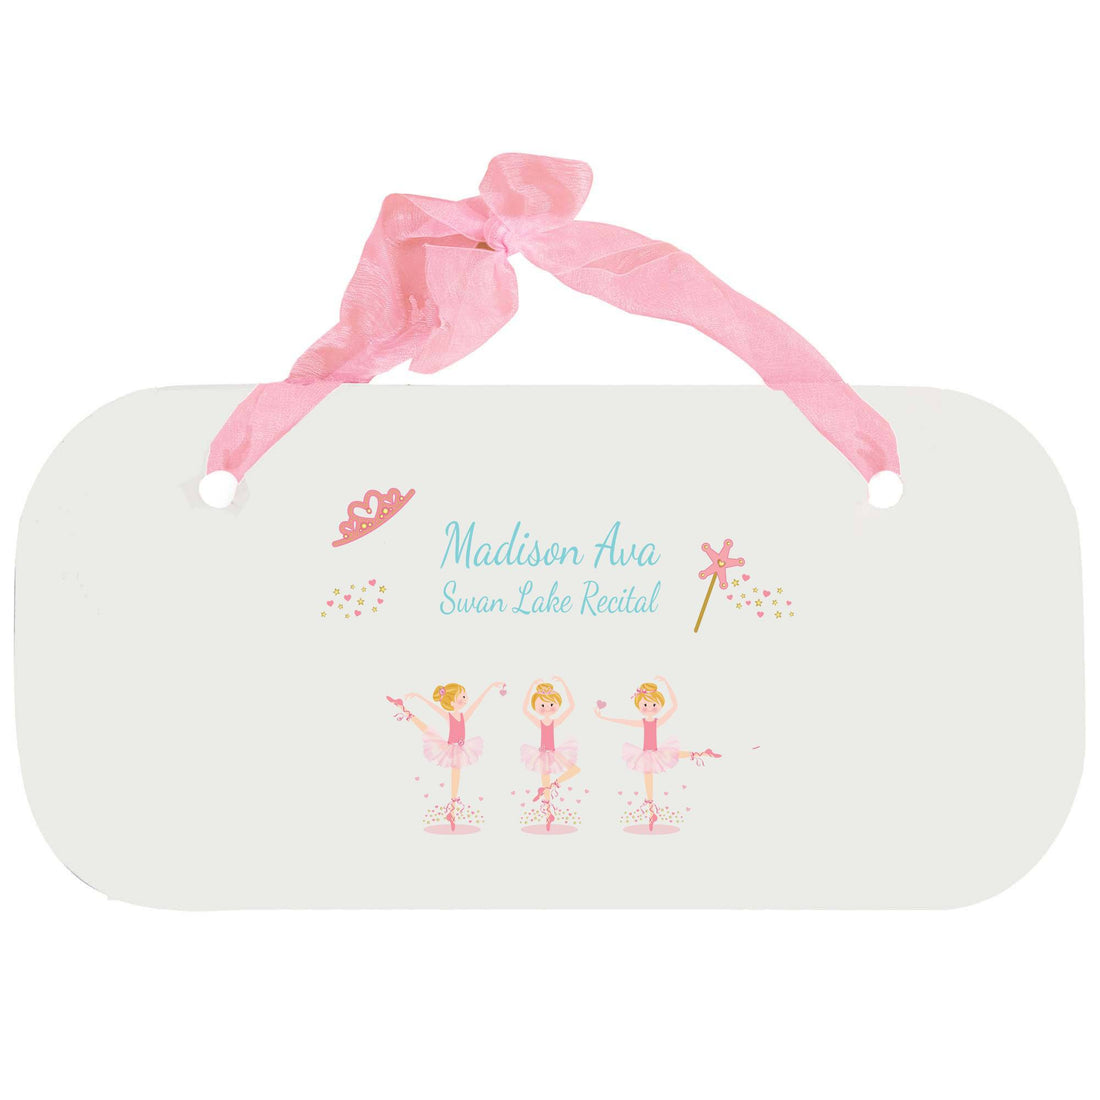 Personalized Girls Wall Plaque with Ballerina Blonde design